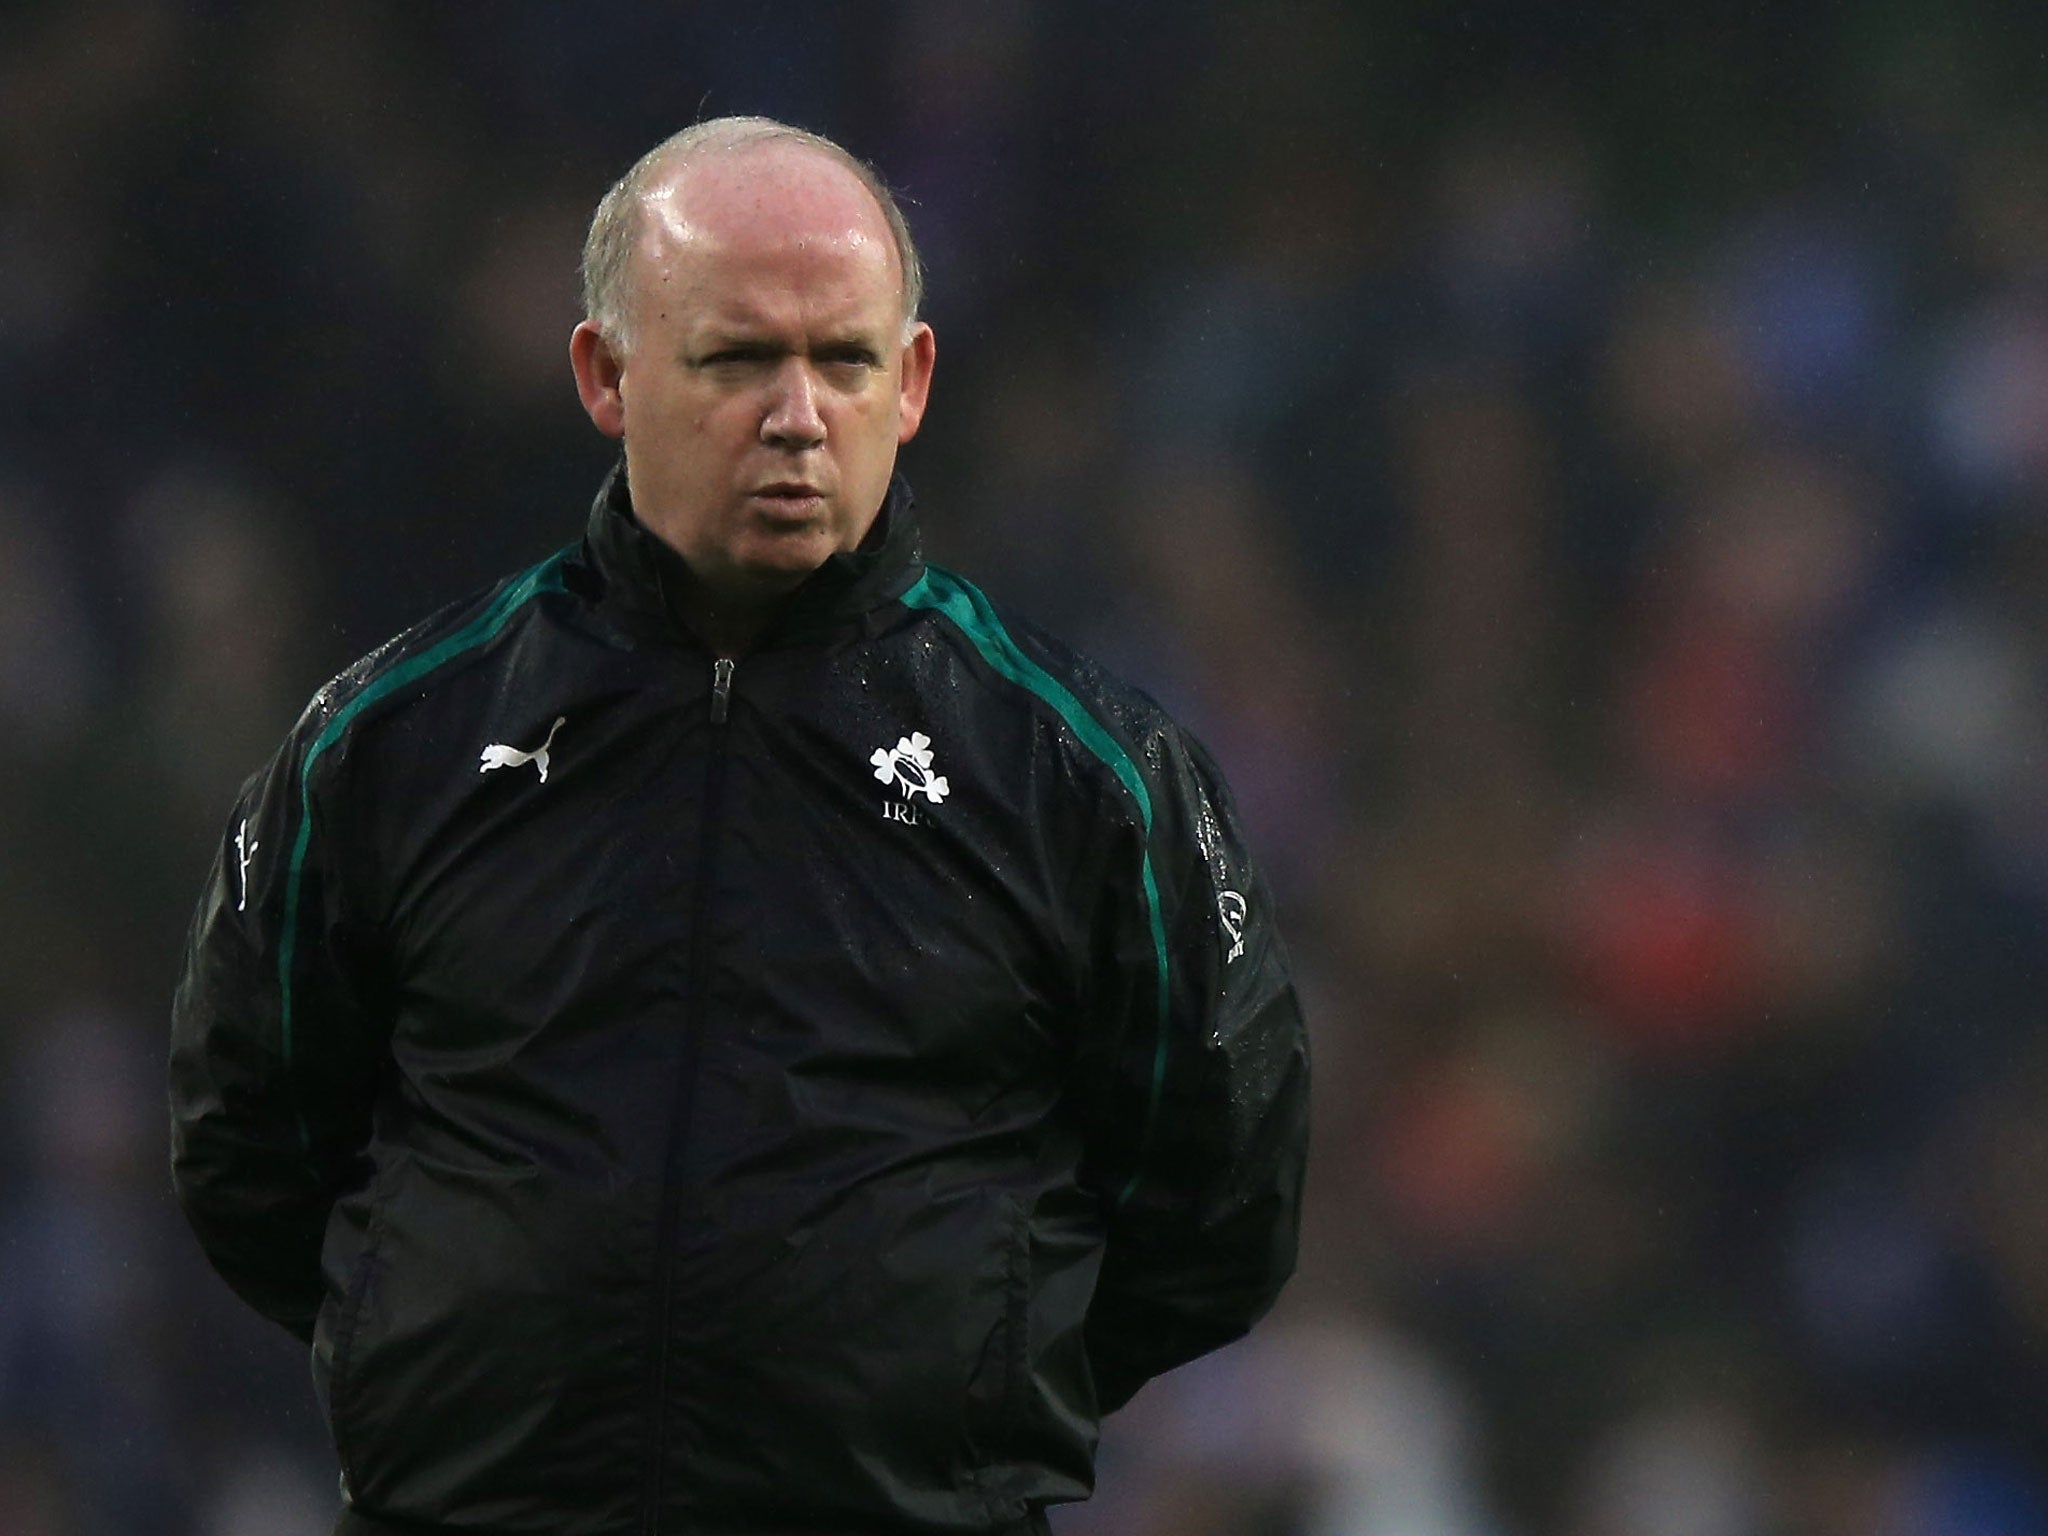 The Ireland coach, Declan Kidney, must feel like he is responsible for a MASH tent rather than an international rugby team